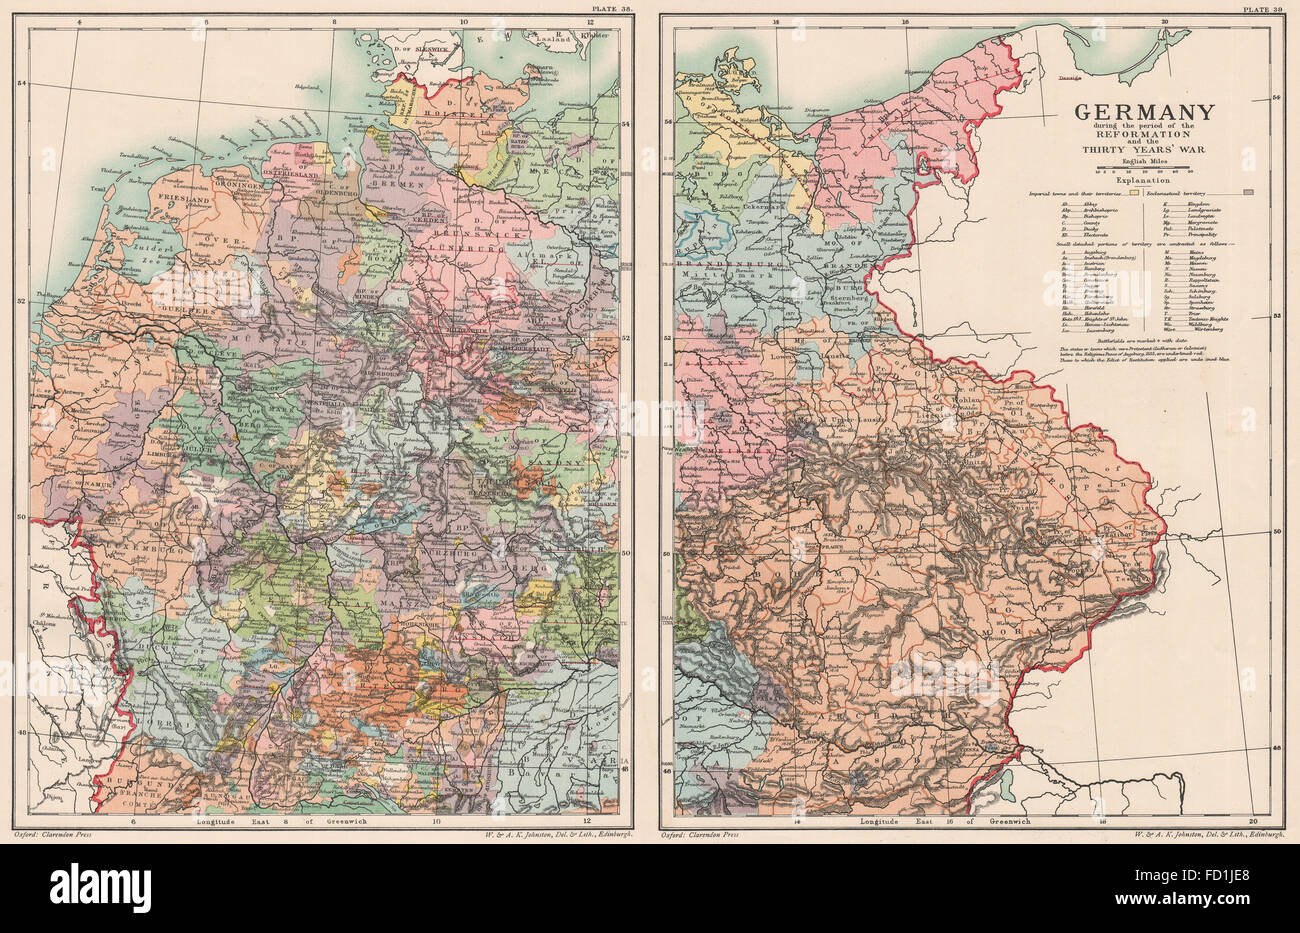 GERMANY: during the Reformation & the thirty years' war, 1902 antique map Stock Photo